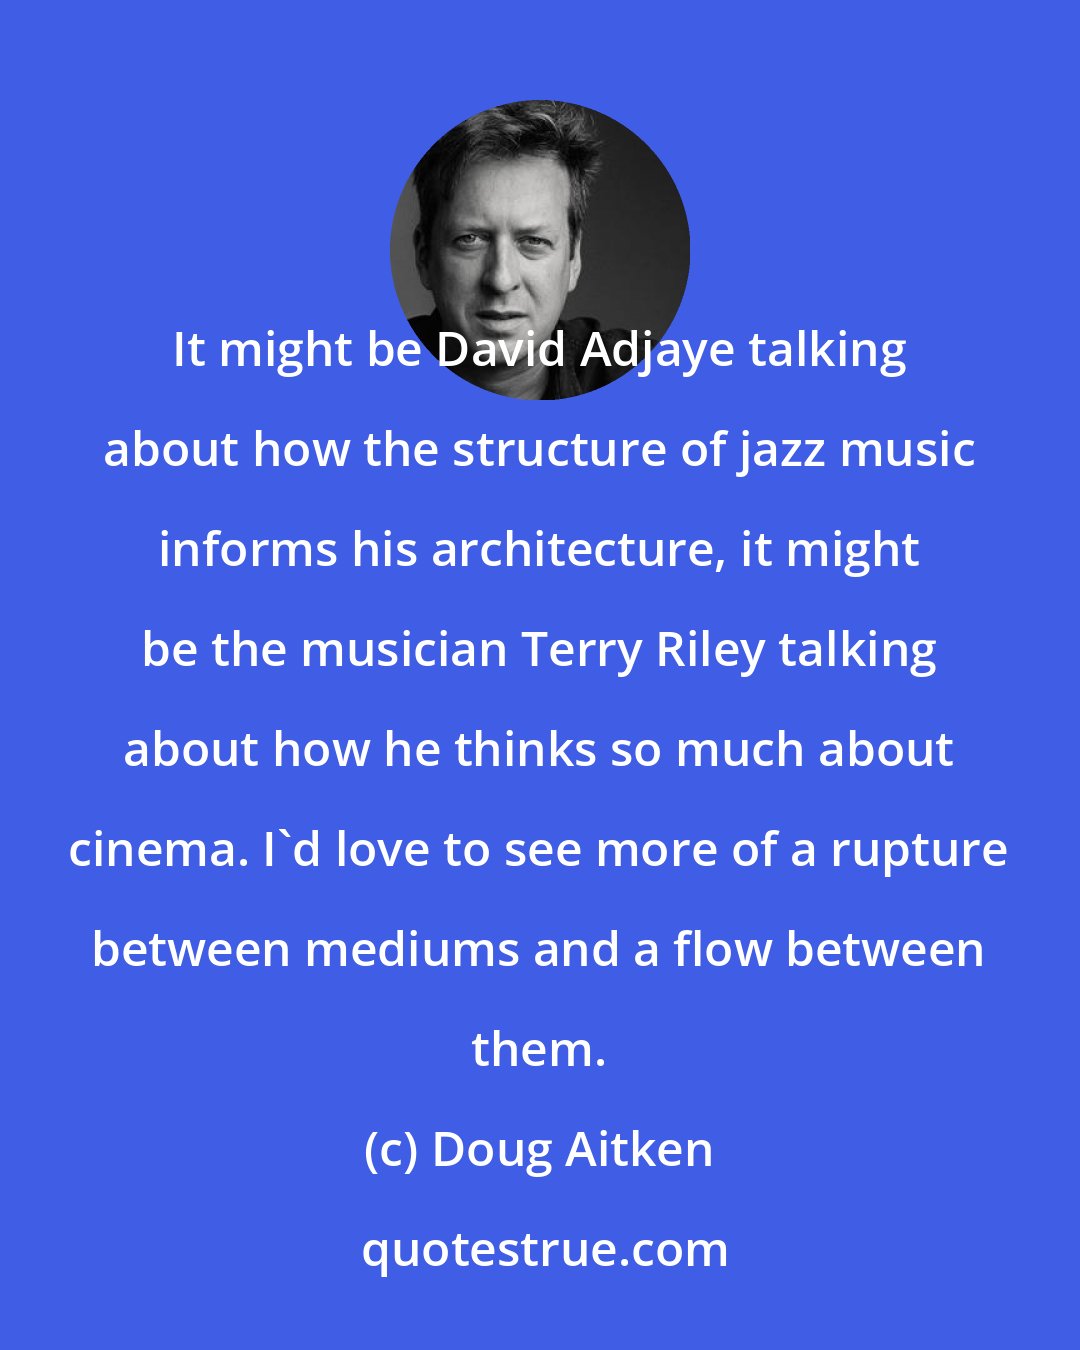 Doug Aitken: It might be David Adjaye talking about how the structure of jazz music informs his architecture, it might be the musician Terry Riley talking about how he thinks so much about cinema. I'd love to see more of a rupture between mediums and a flow between them.